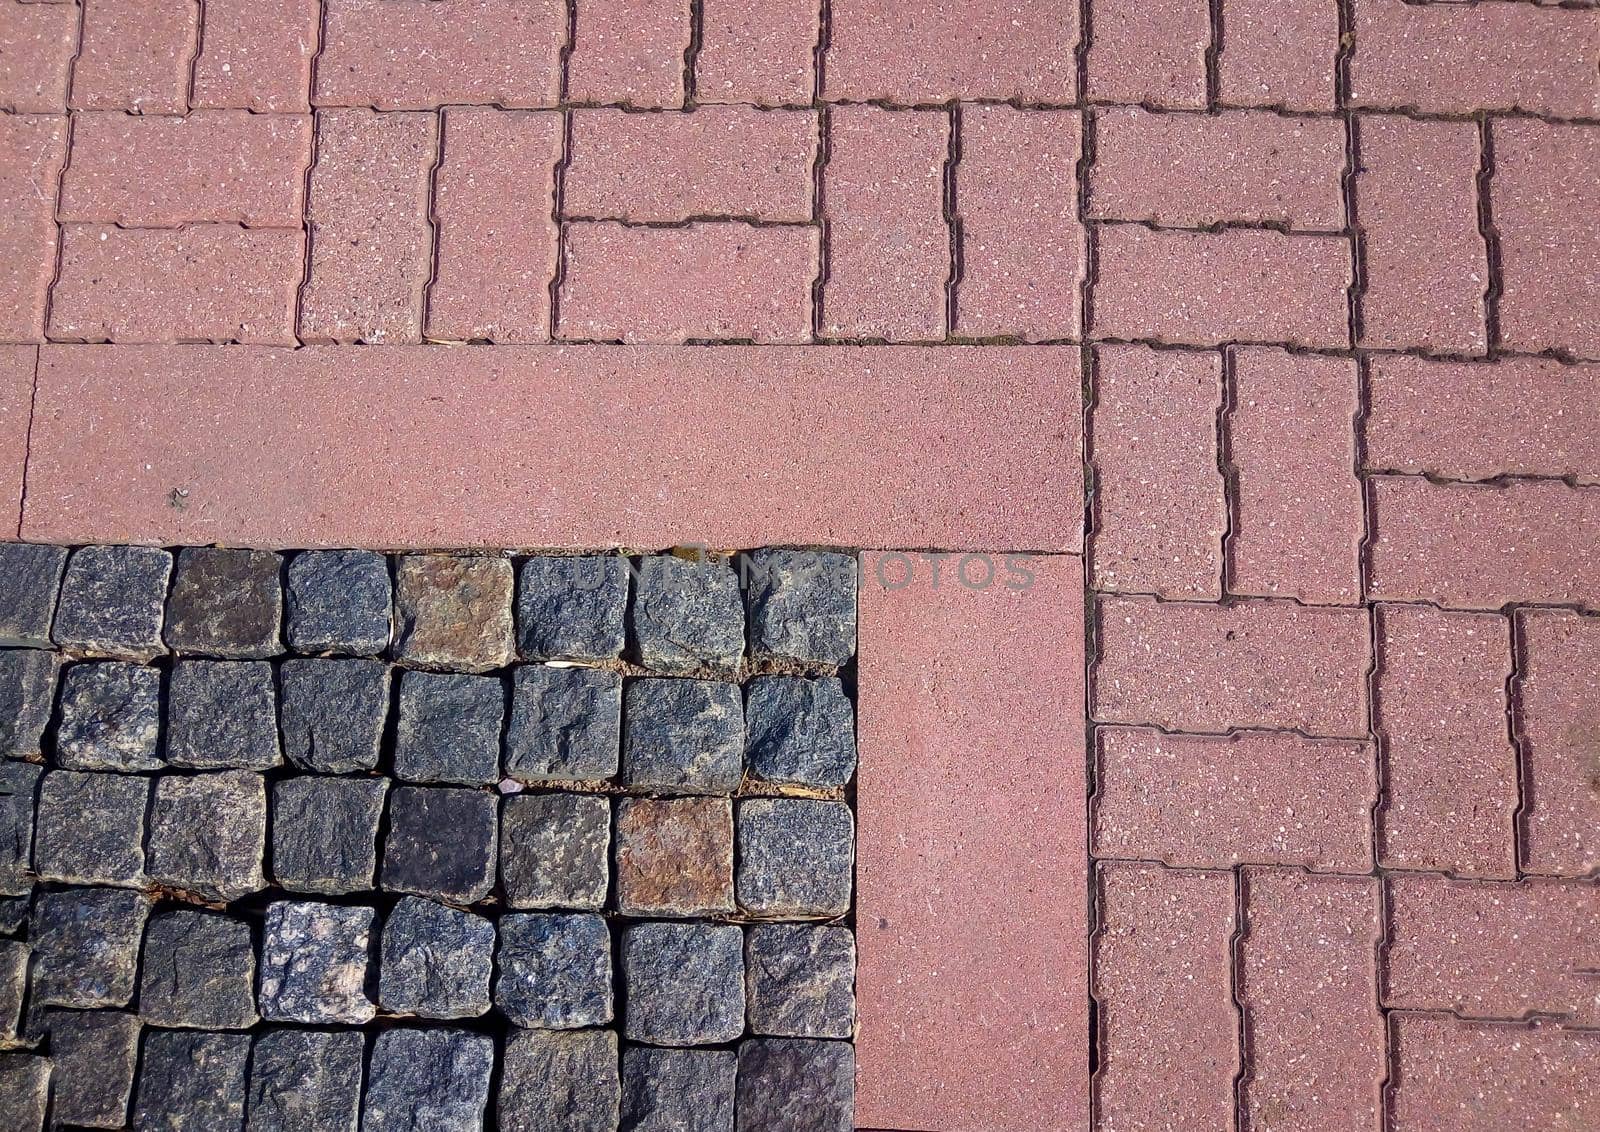 Rough pavement texture, old gray granite and red tiles by lapushka62